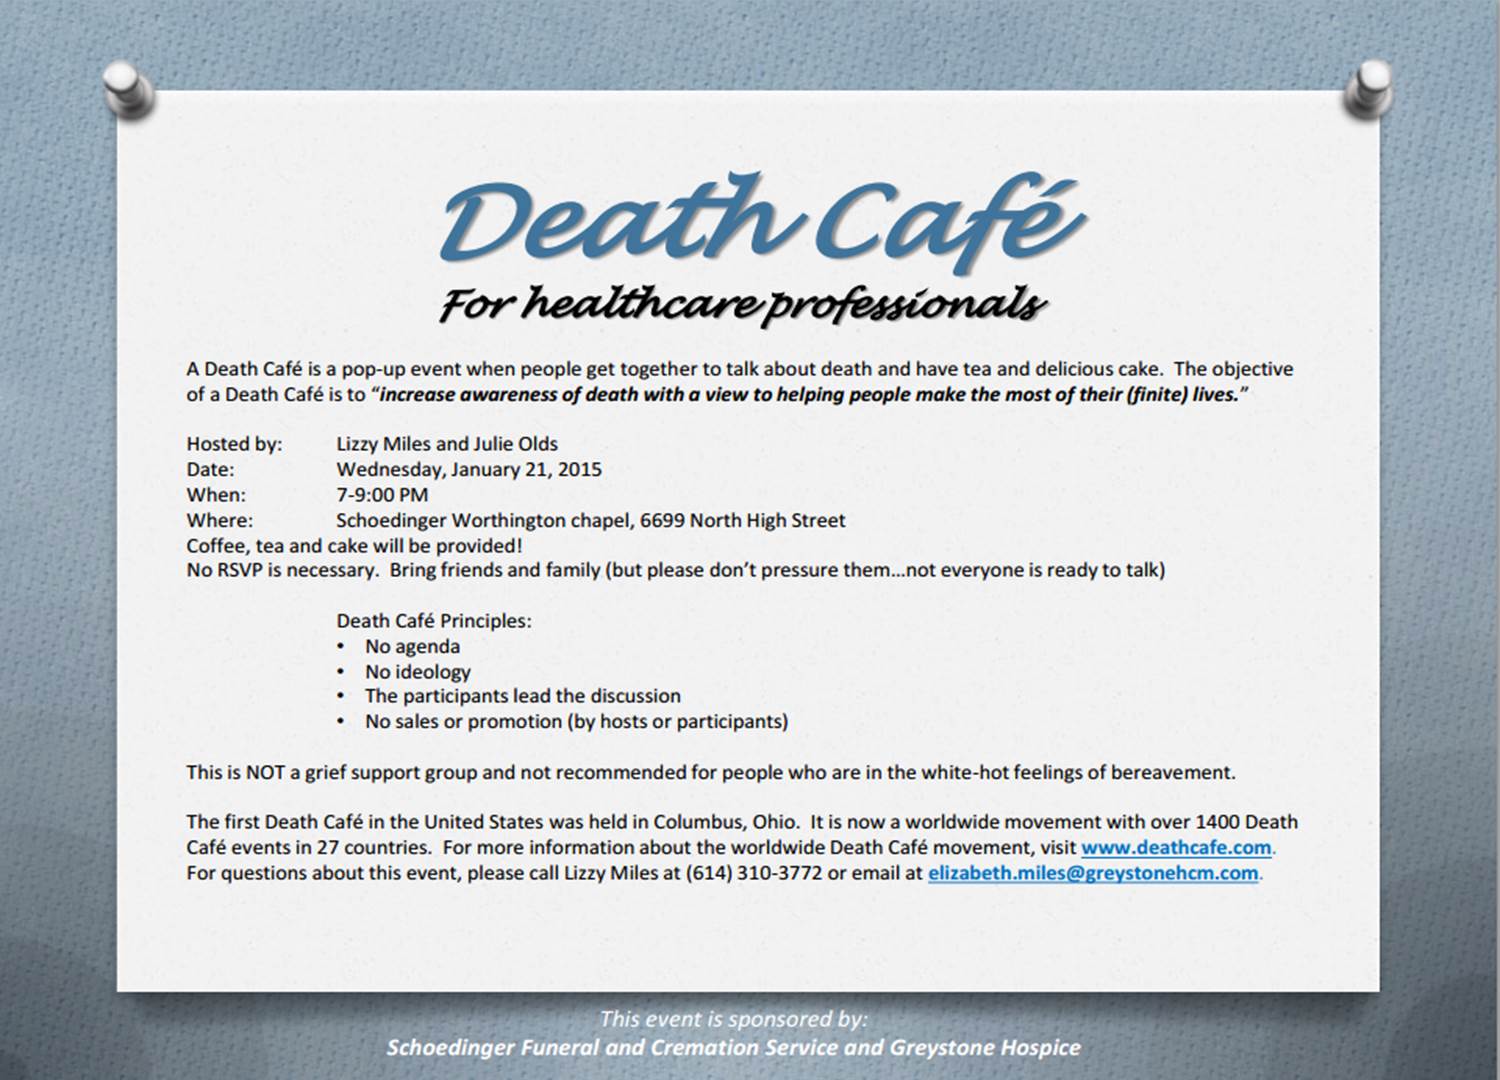 Death Cafe in Worthington, OH for Healthcare Professionals